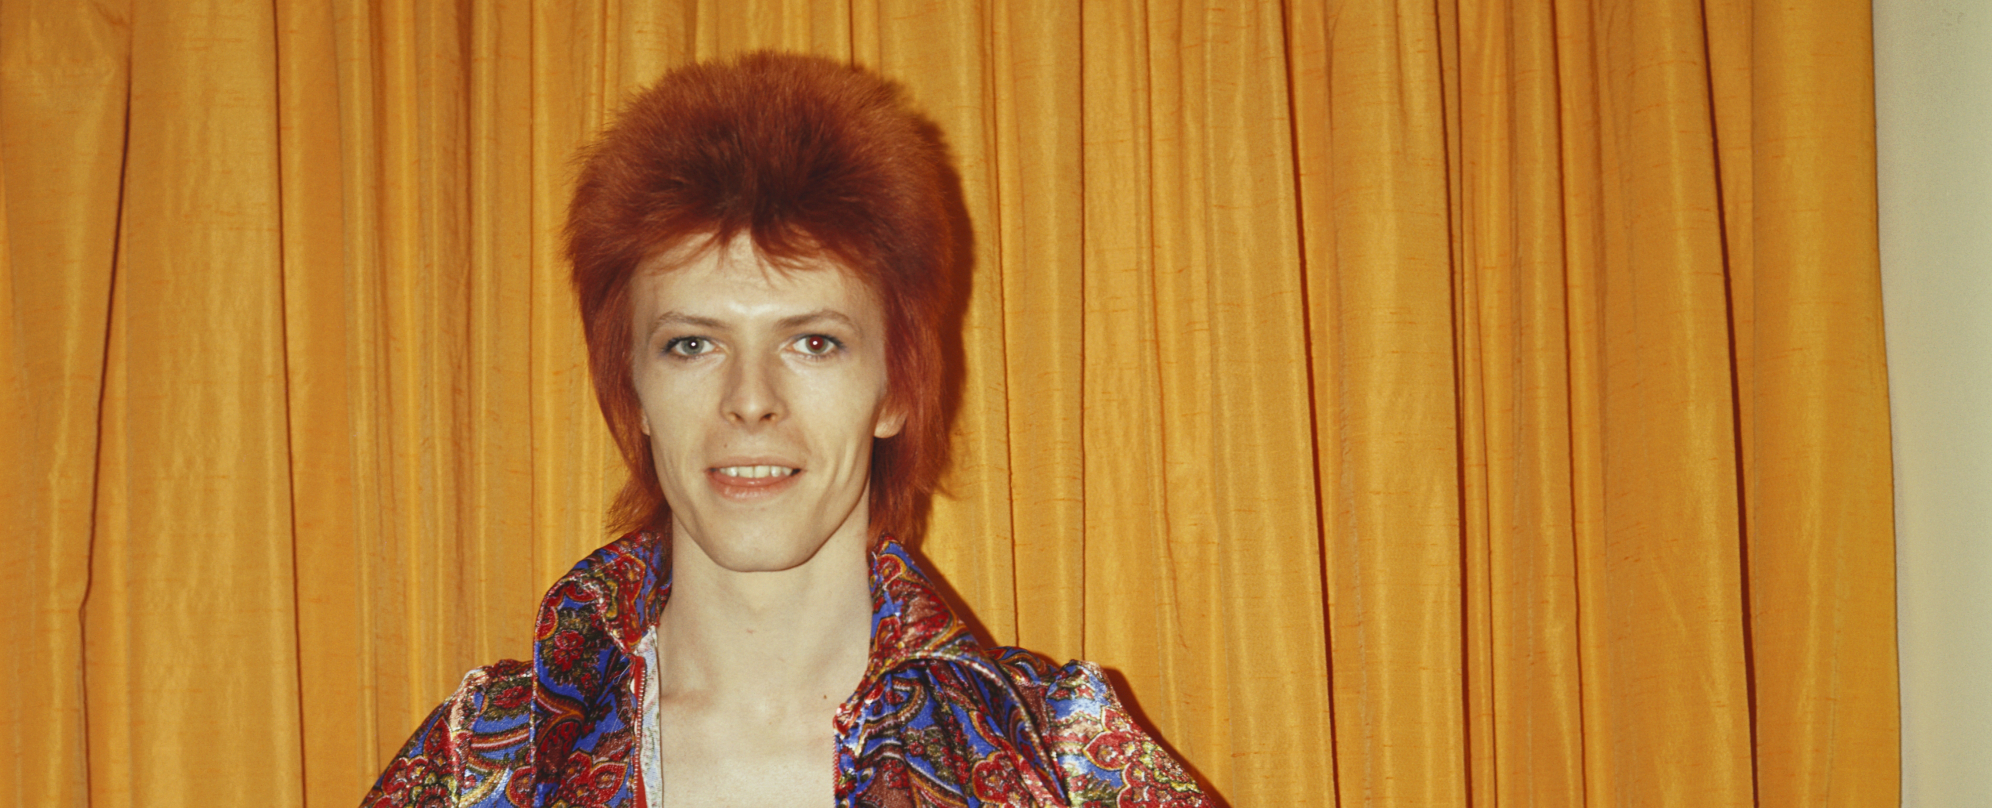 3 Songs You Didn’t Know David Bowie Wrote for Other Artists